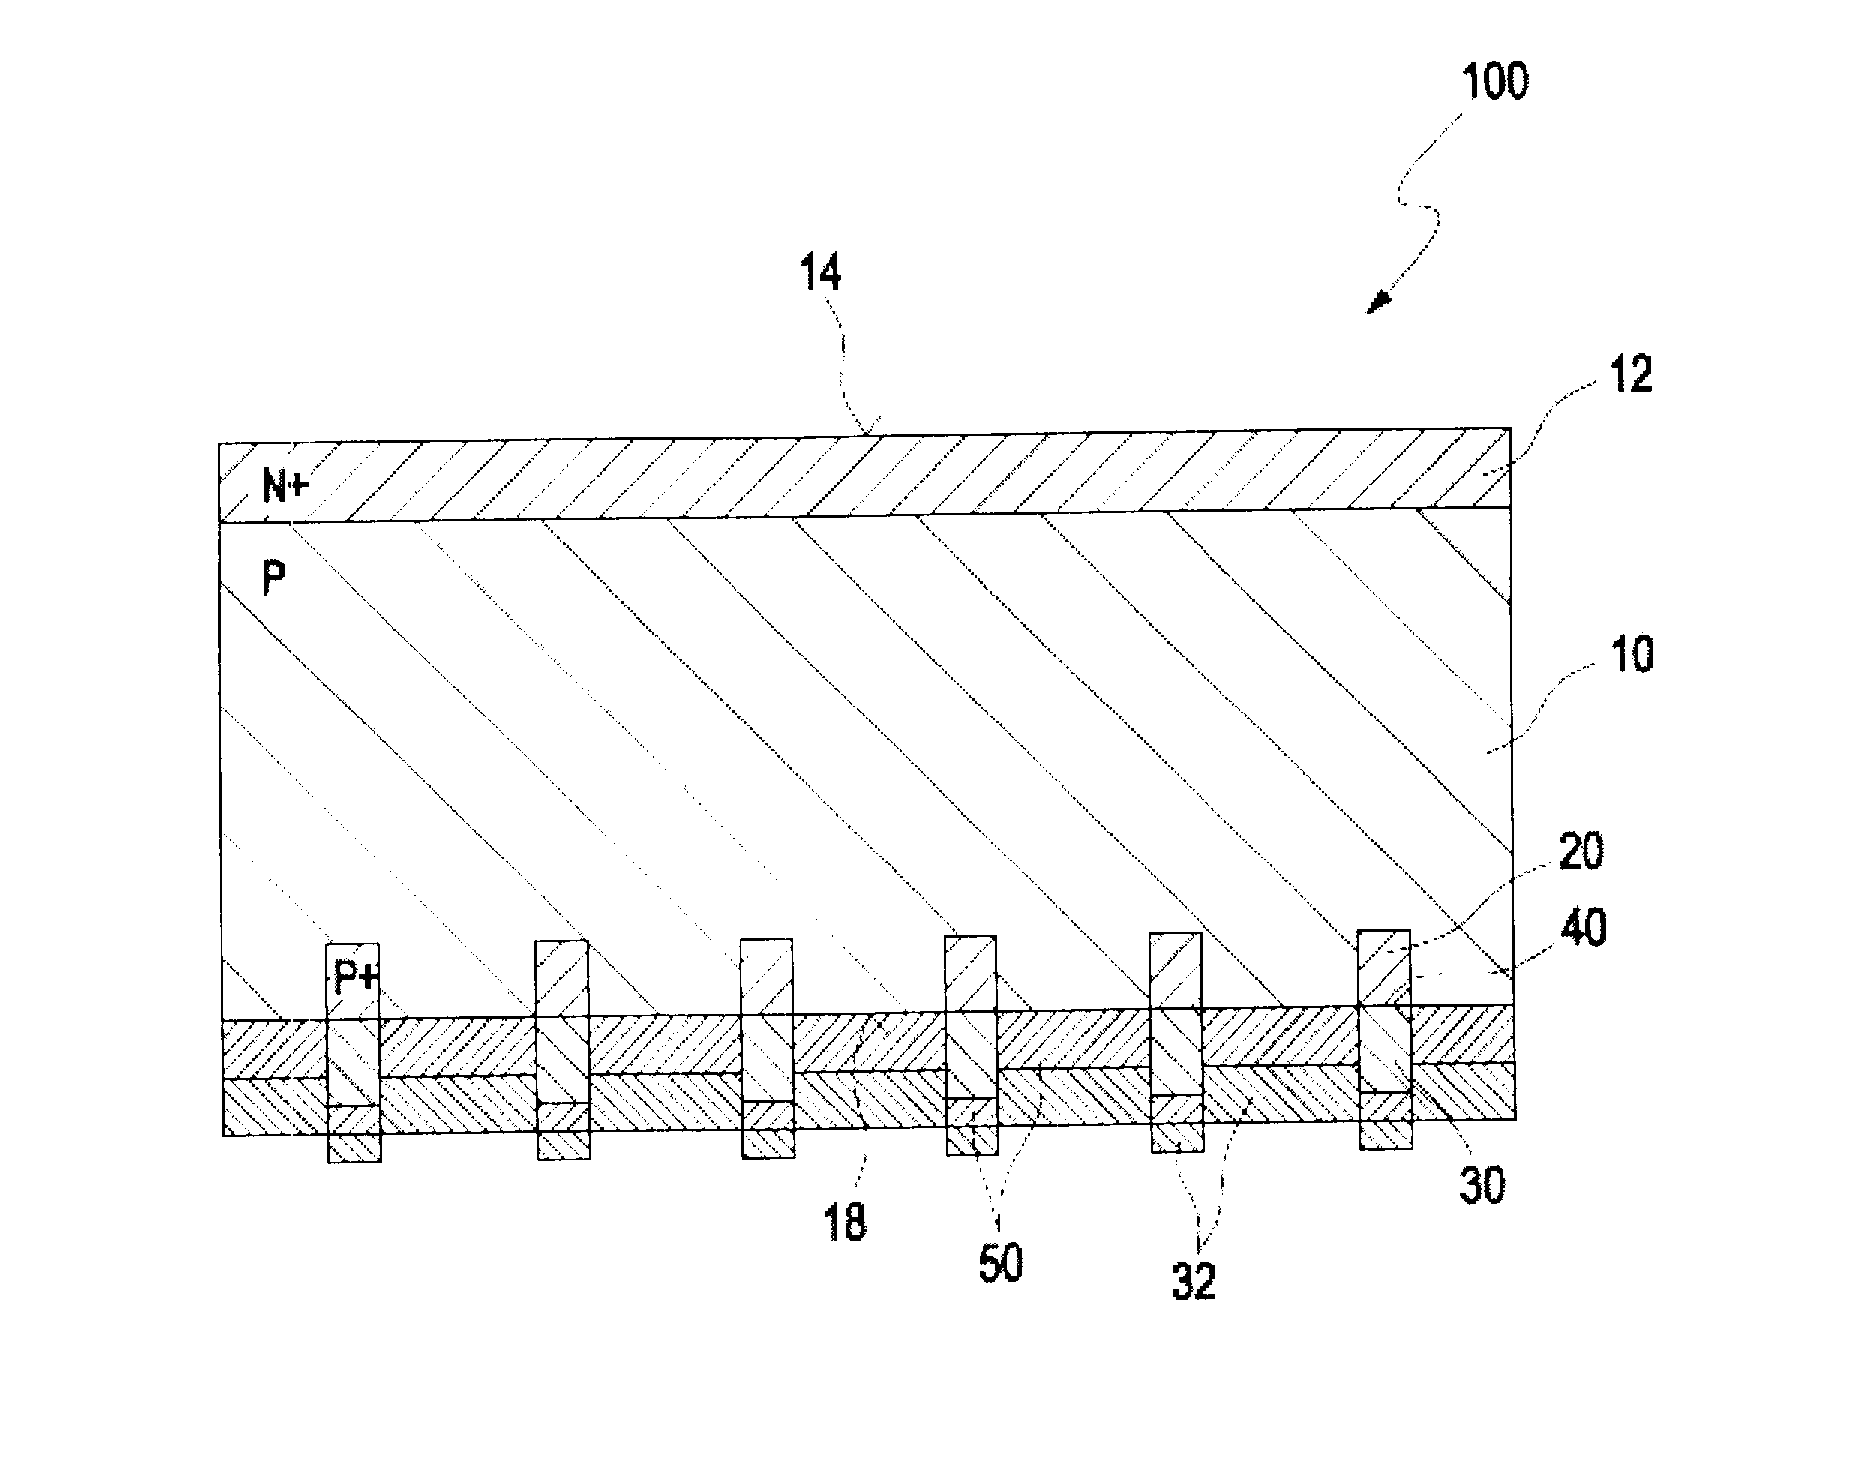 Manufacturing process for making photovoltaic solar cells